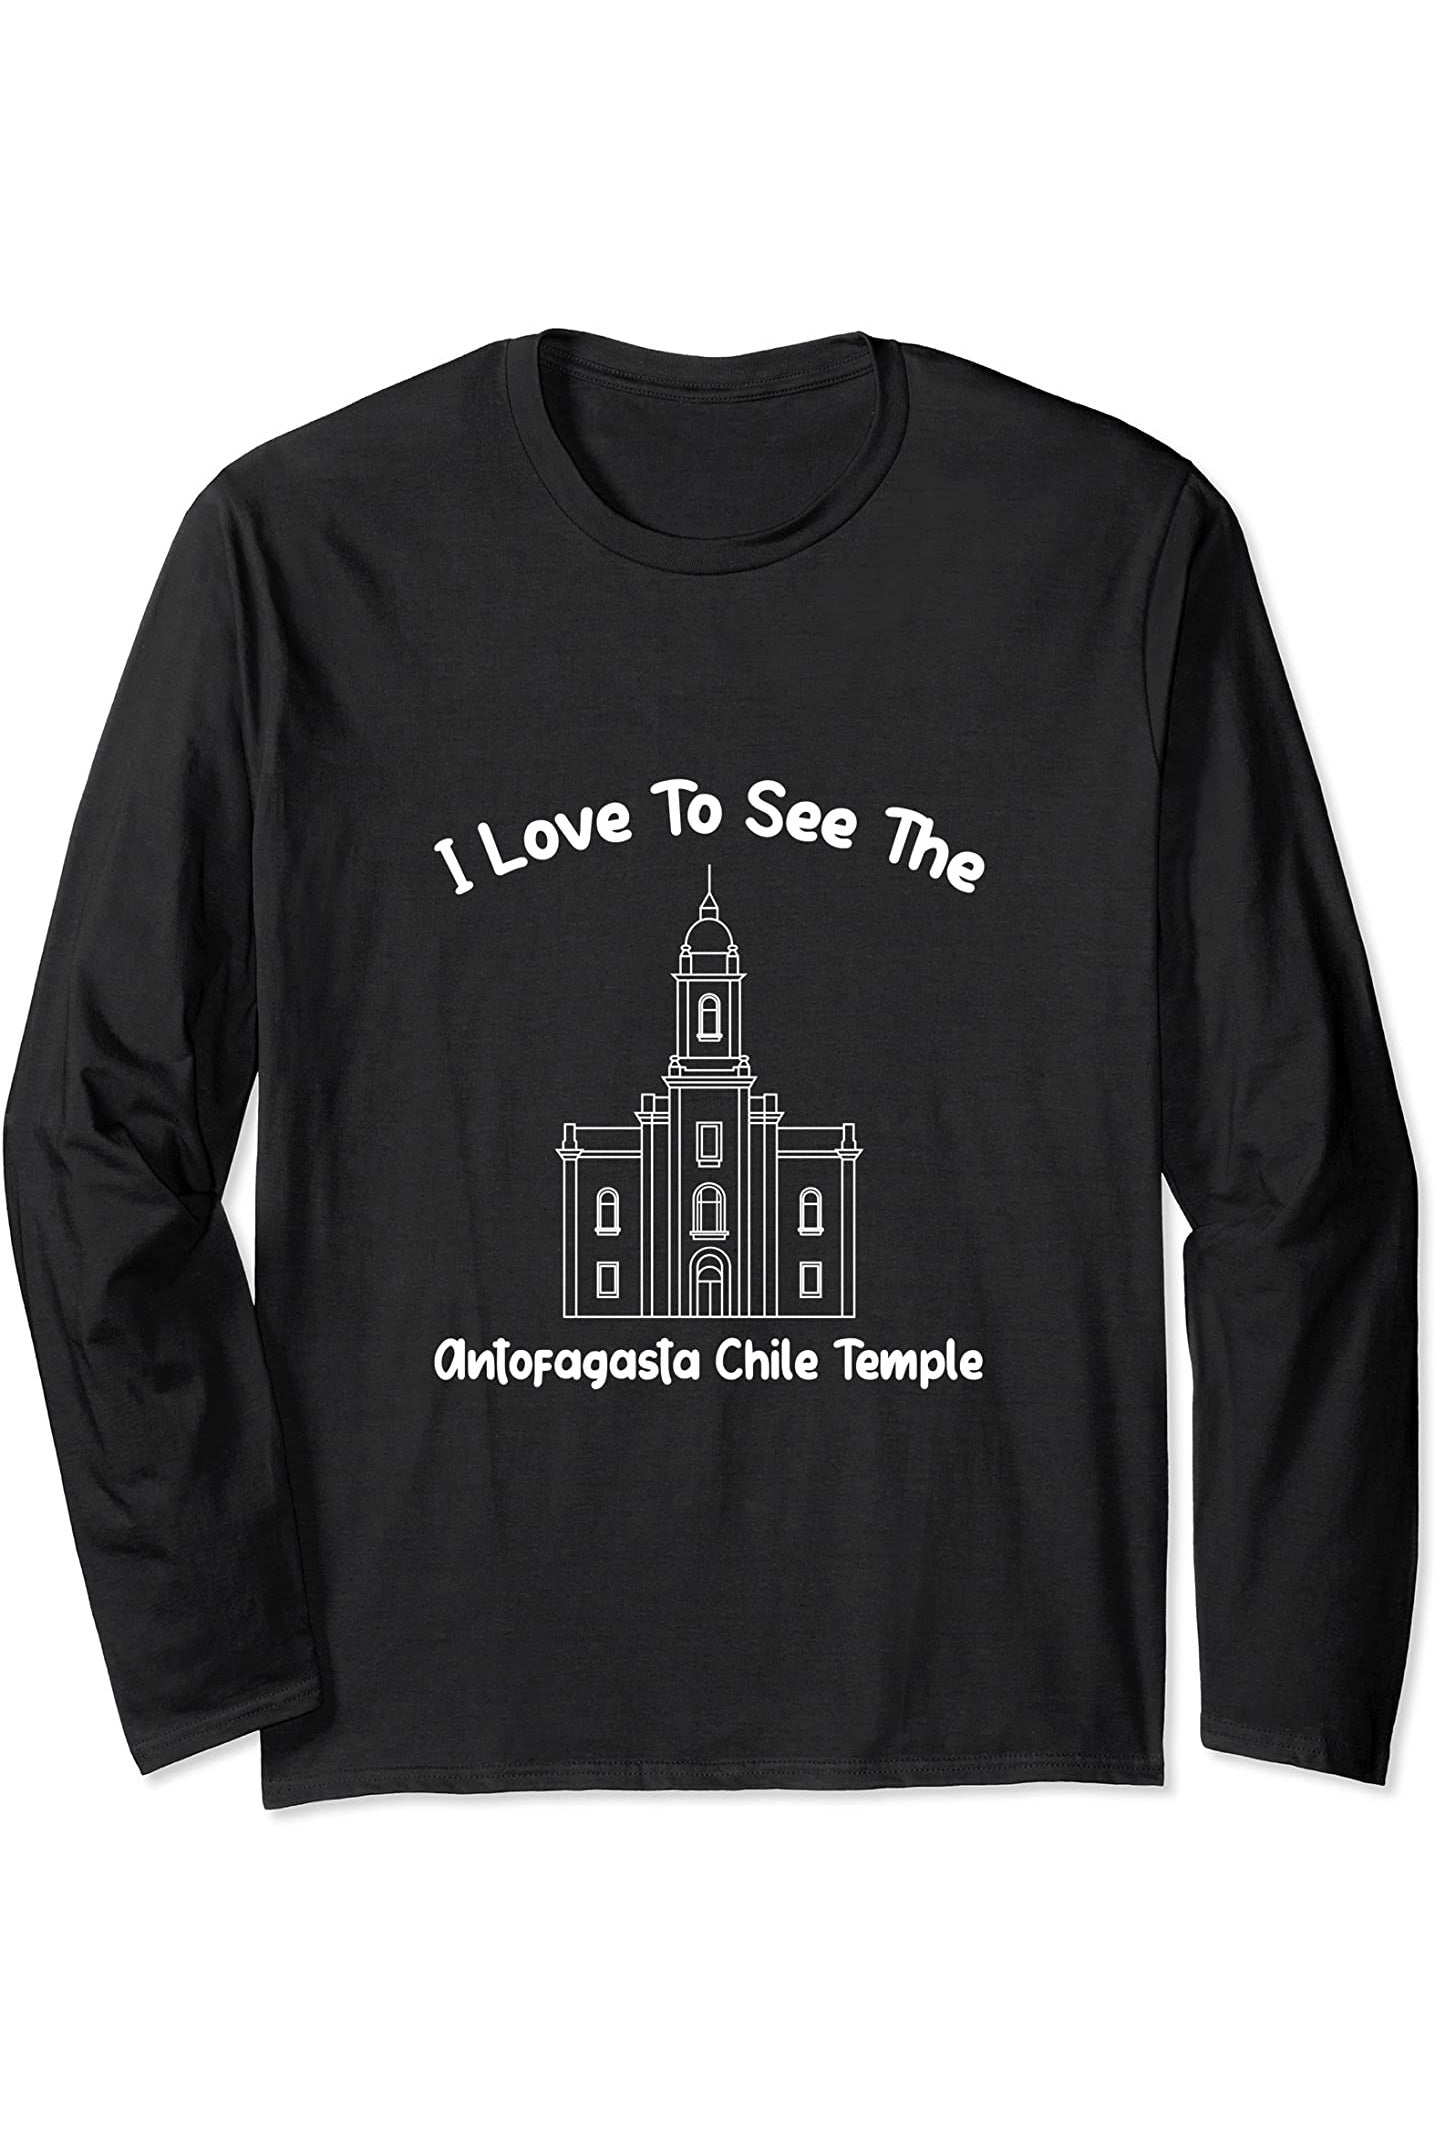 Antofagasta Chile Temple Long Sleeve T-Shirt - Primary Style (English) US